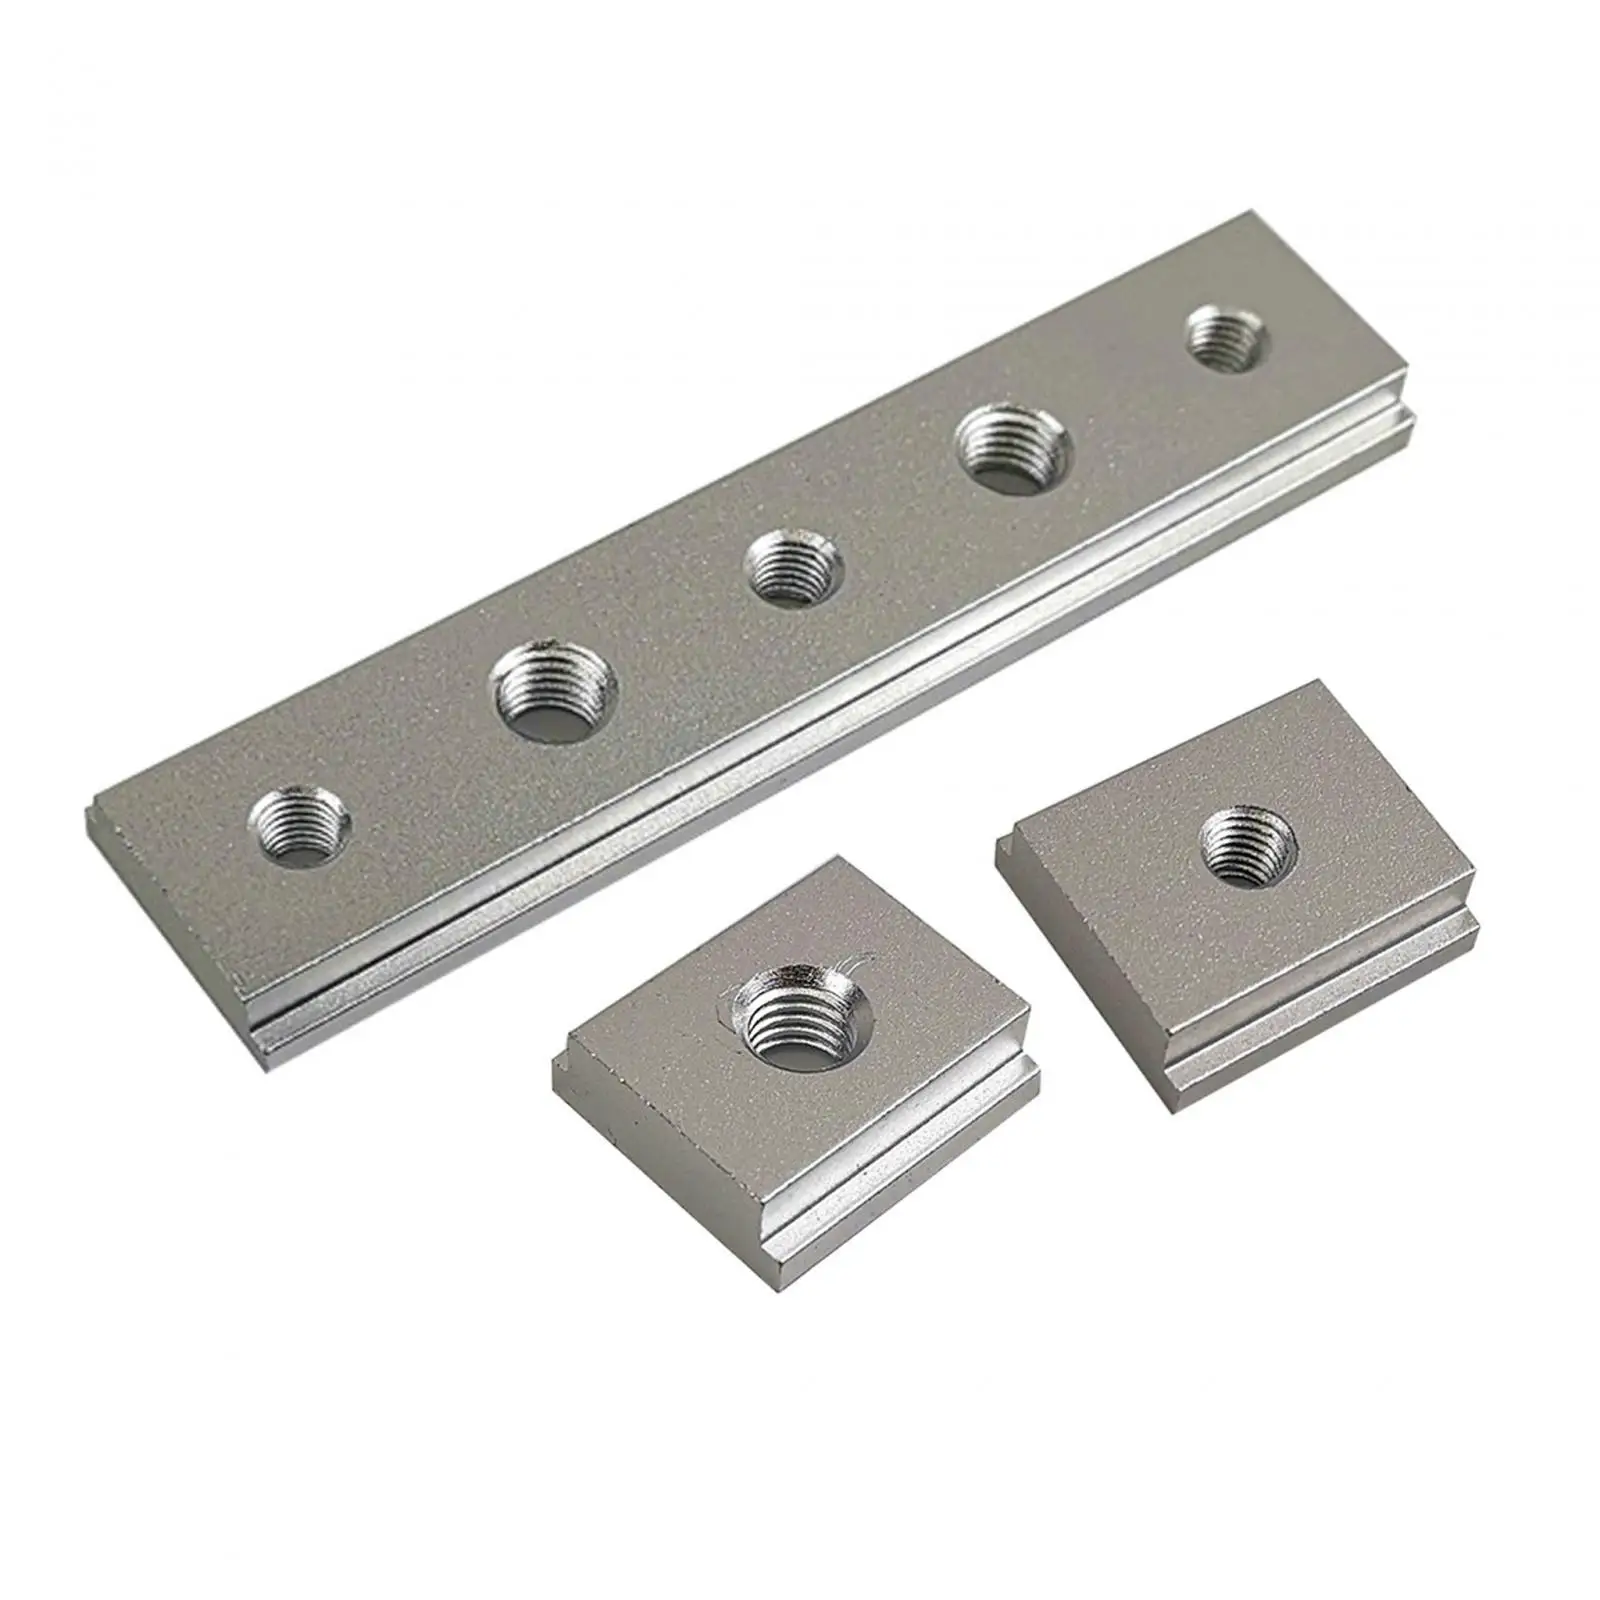 Aluminium Alloy Slot Miter Universal Perfect Sliding Action Use Jig and Fixture Bar Table Saw Gauge Rod